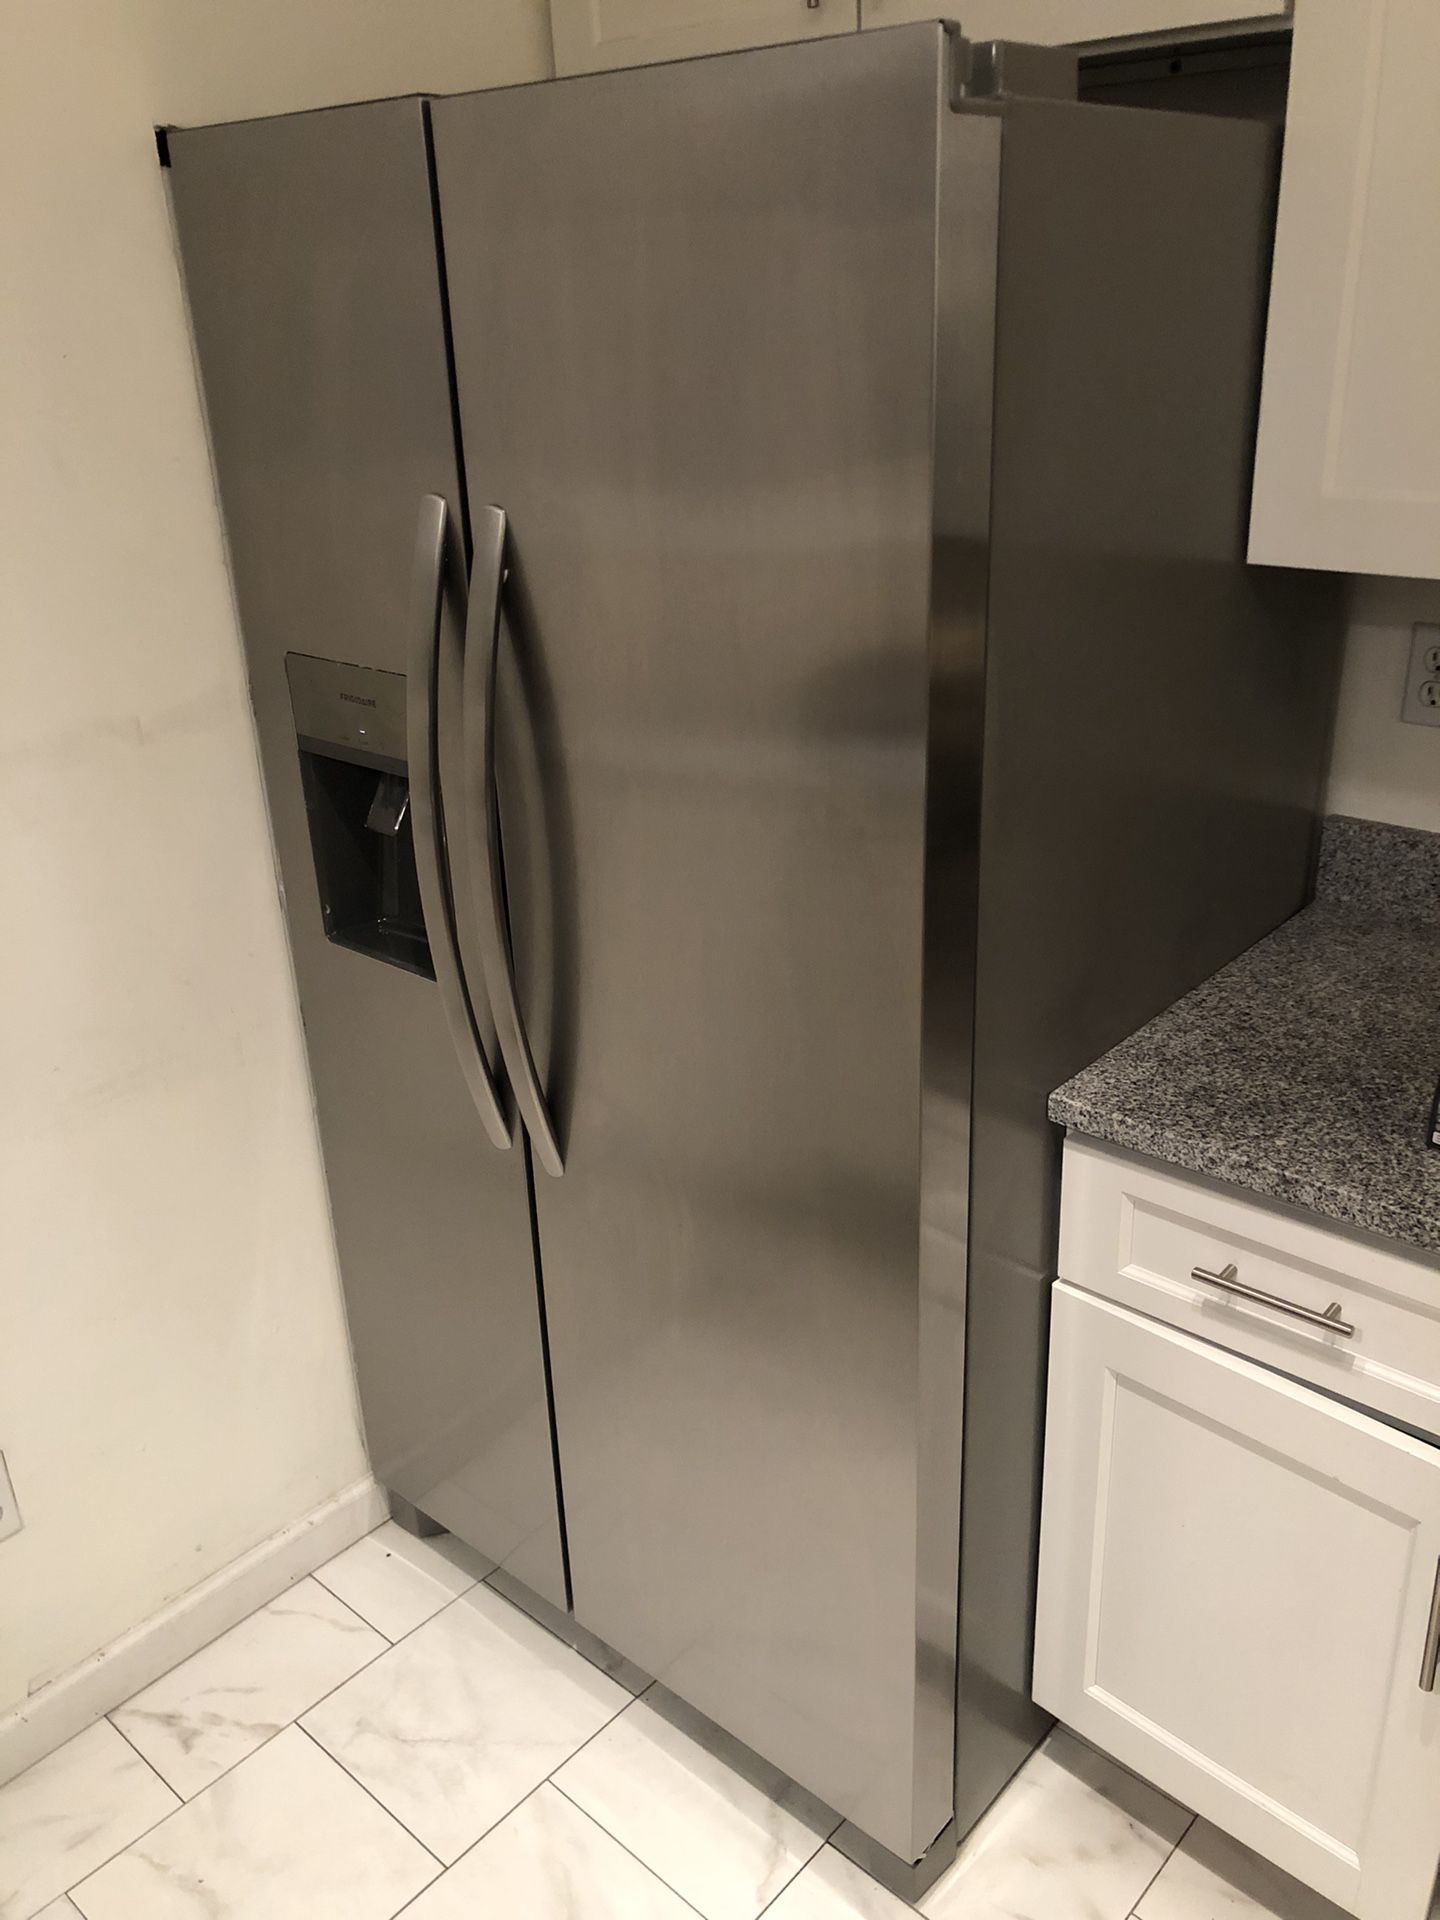 Frigidaire Side by Side Stainless Steel Refrigerator (Delivery Included)